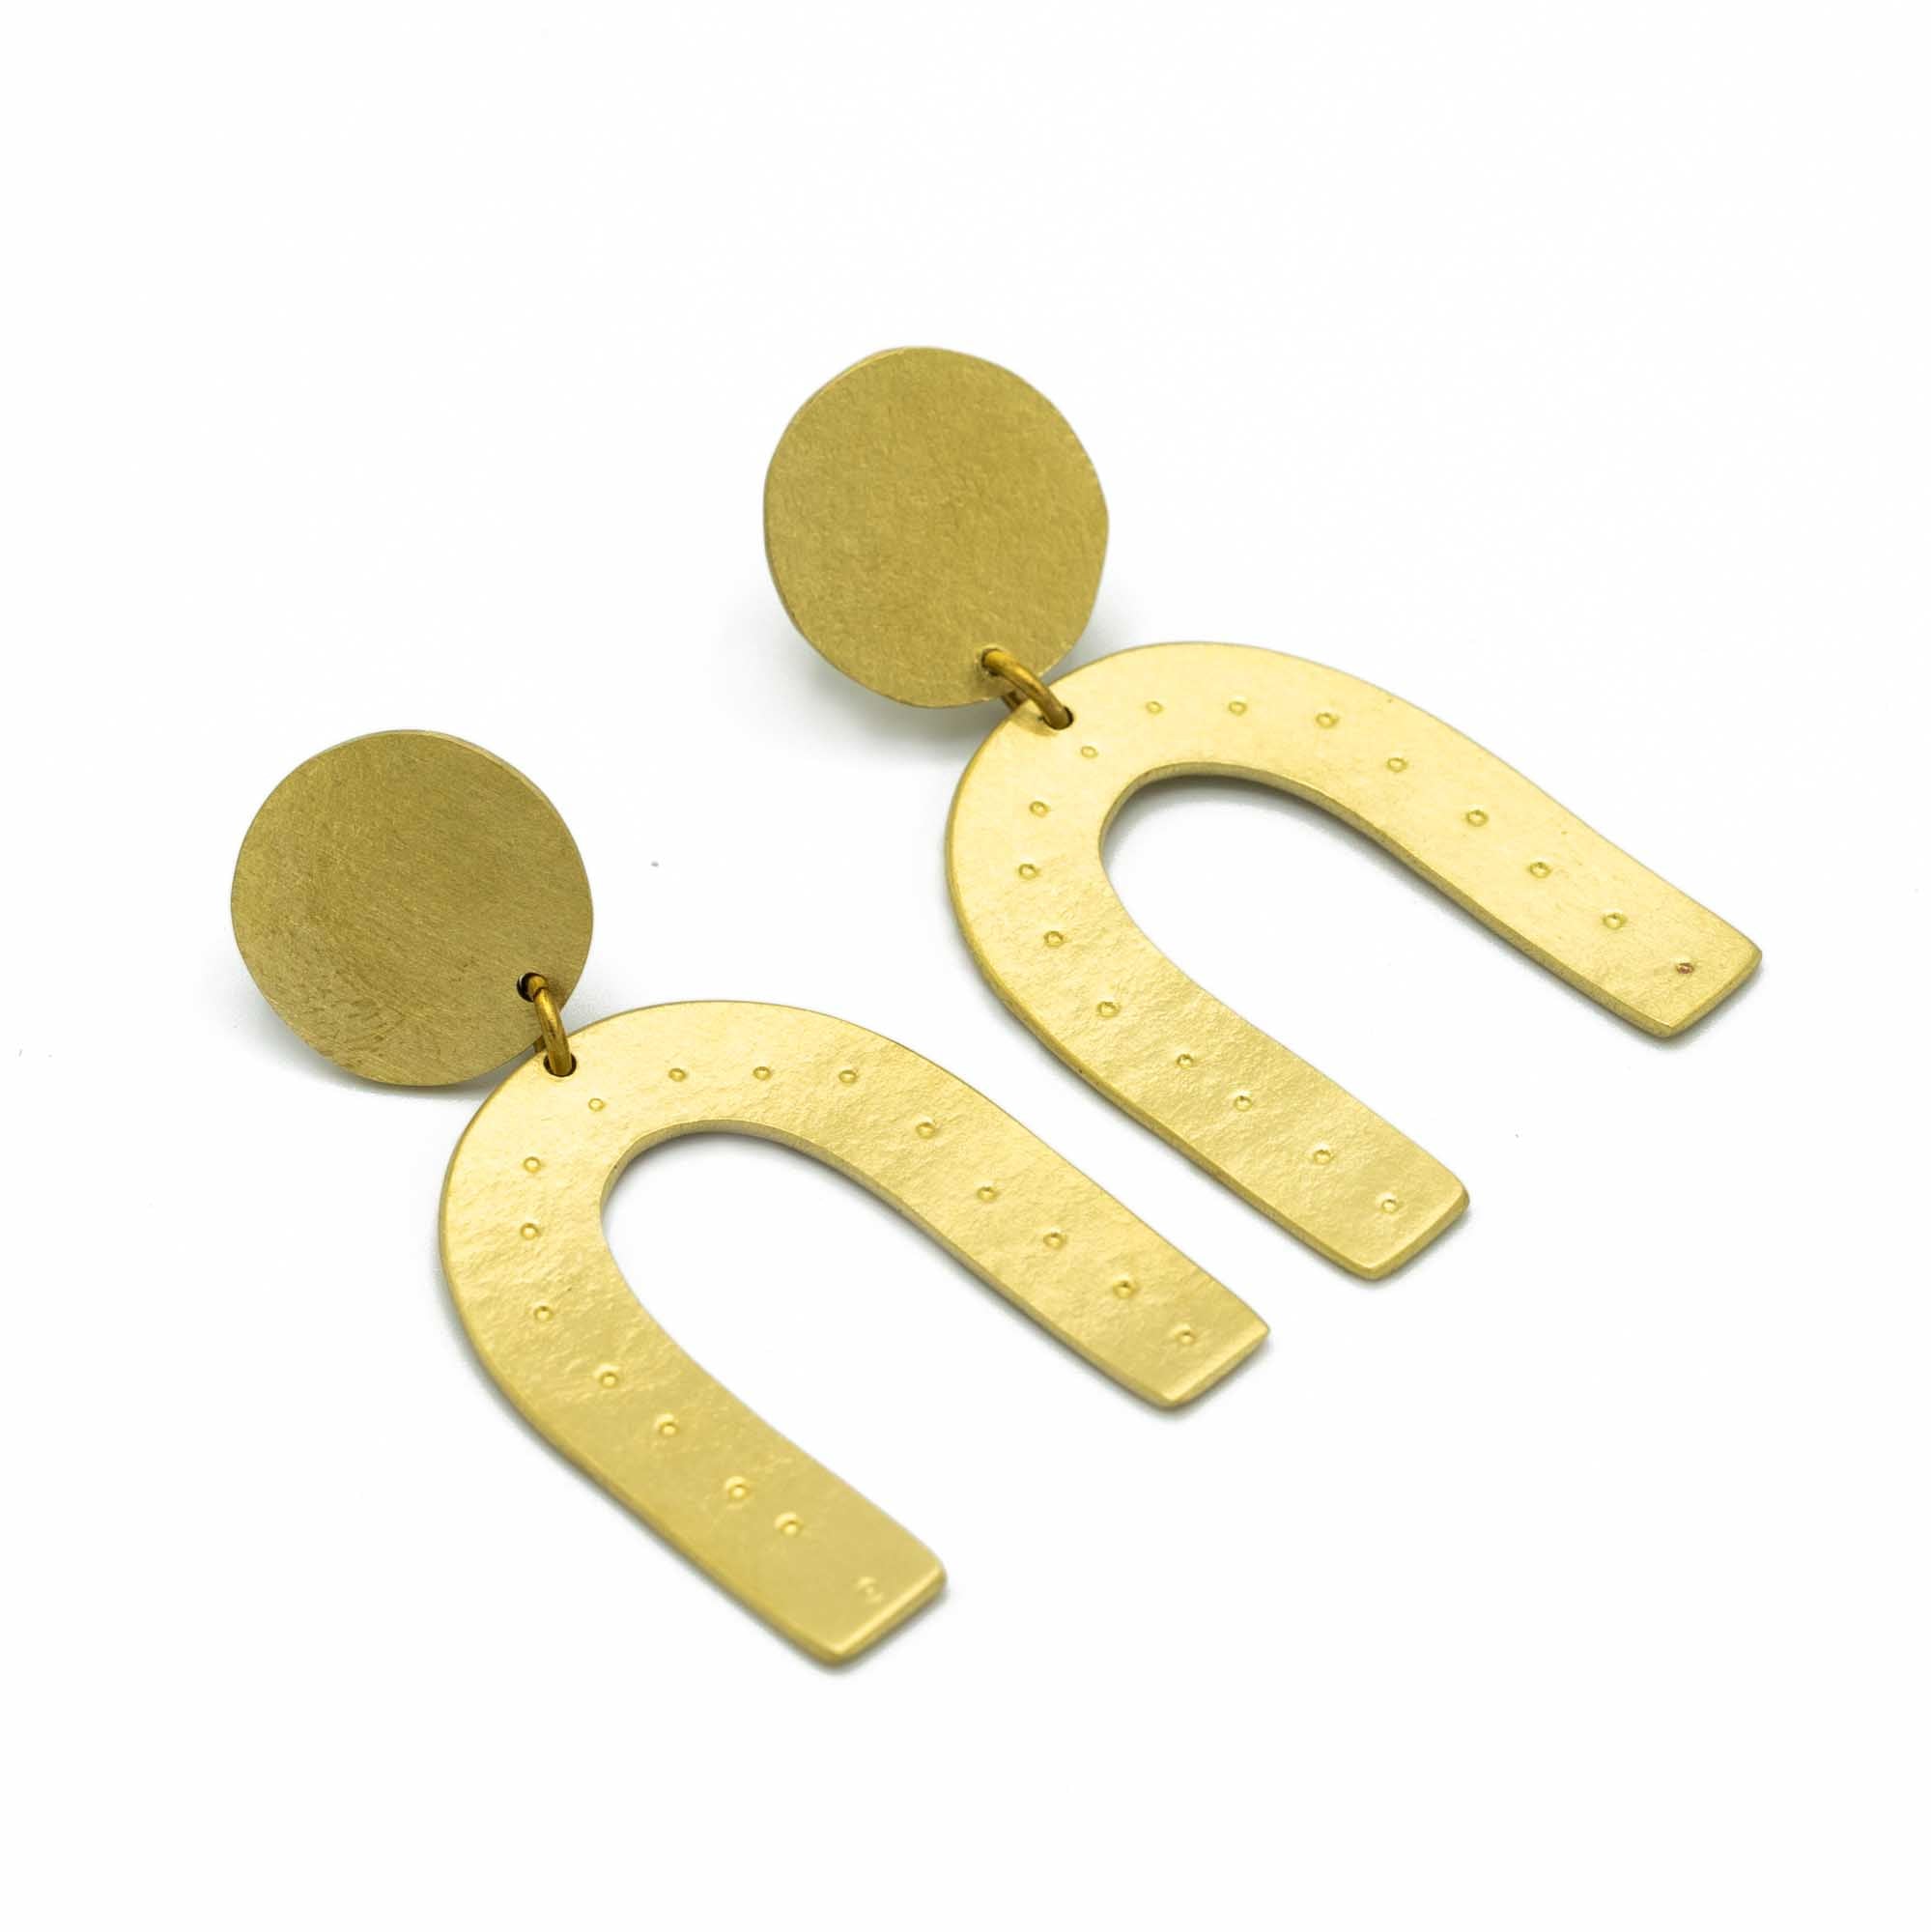 Stood earrings made from brass in the shape of an arch. White background.